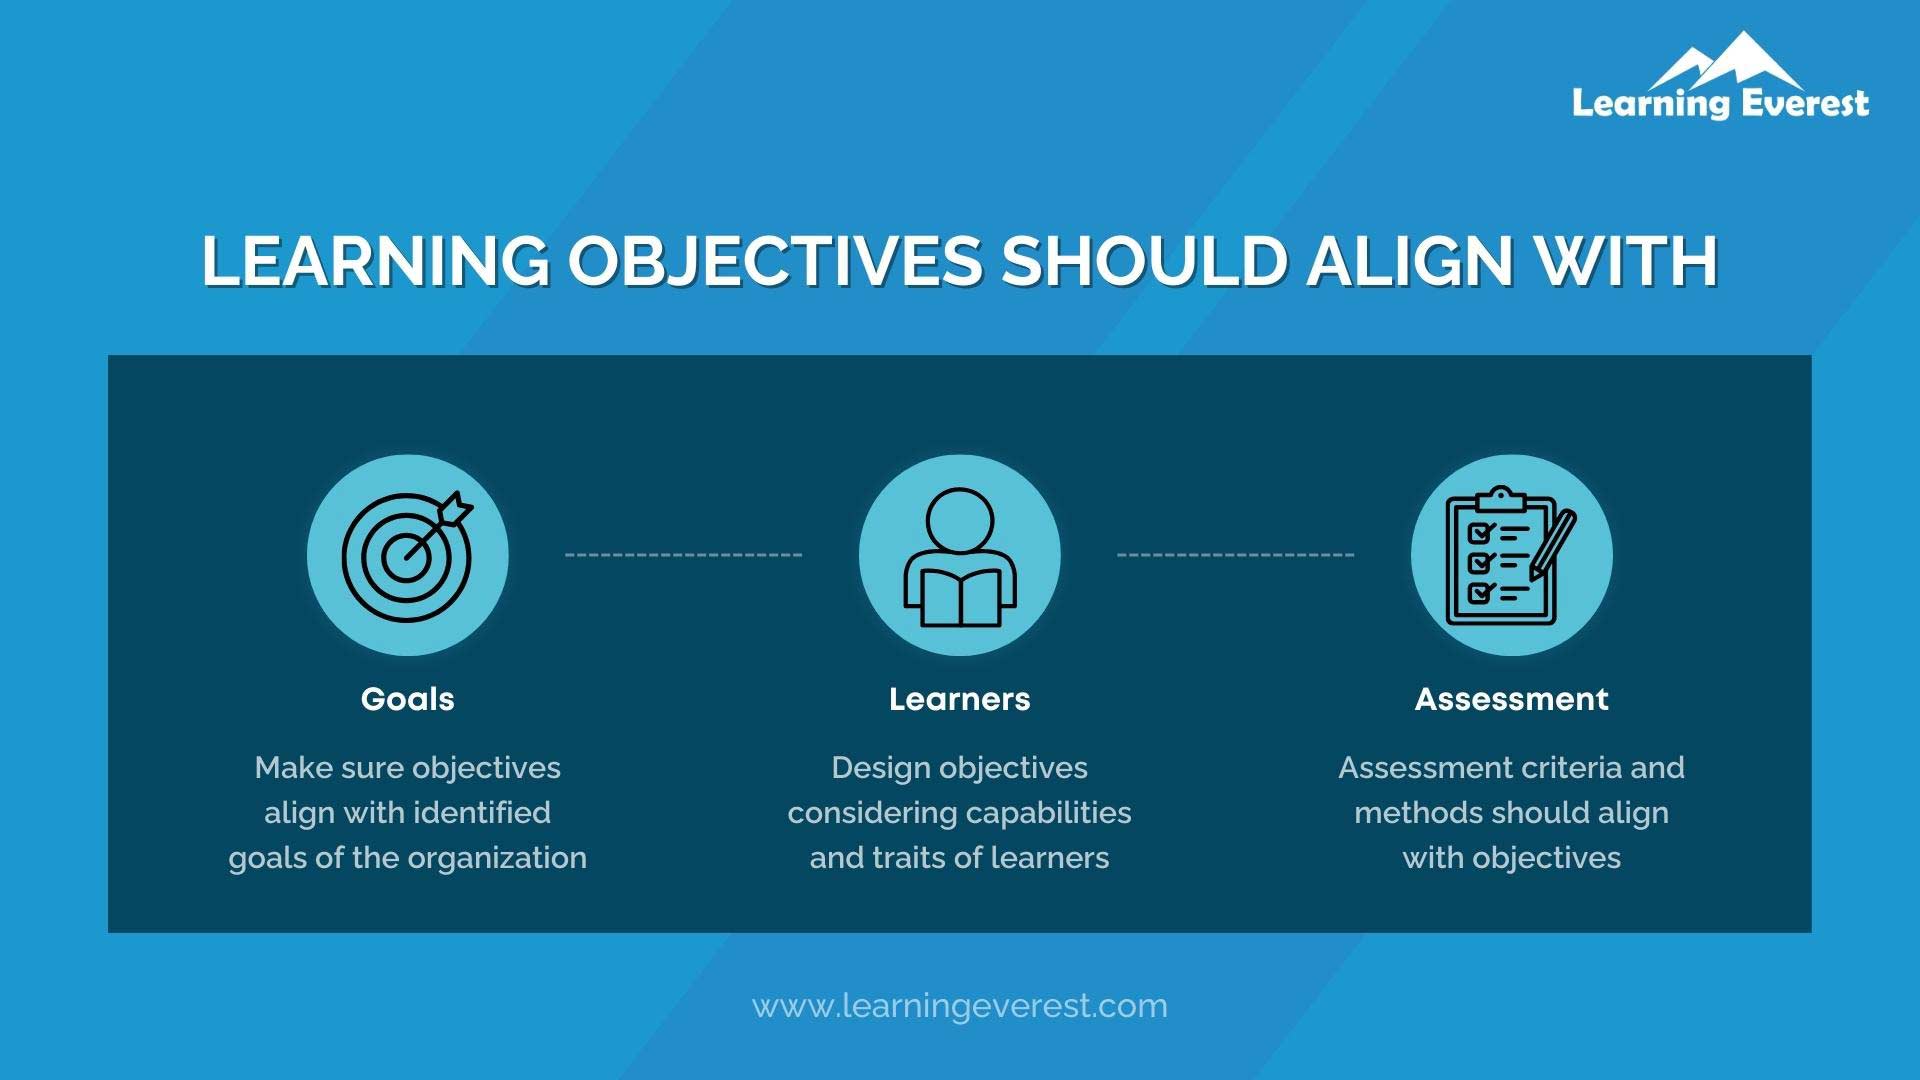 Process Training Challenge - Aligning Learning Objectives with Business Objectives